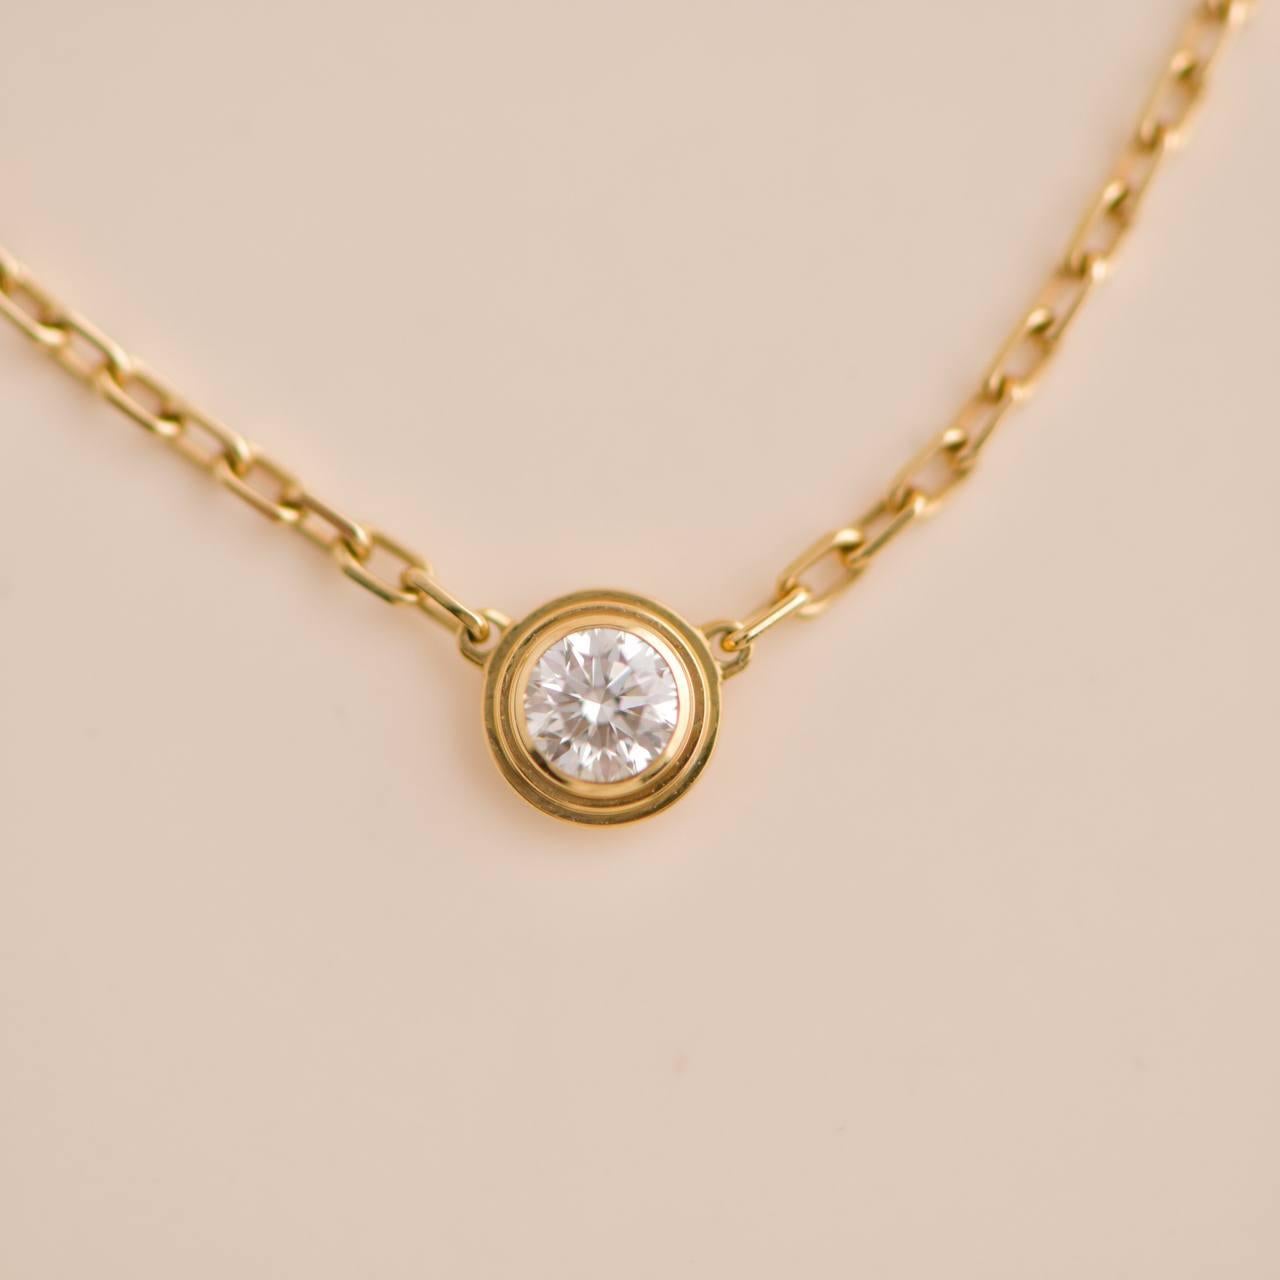 Women's or Men's Cartier D'AMOUR Diamond Small Model Yellow Gold Pendant Necklace